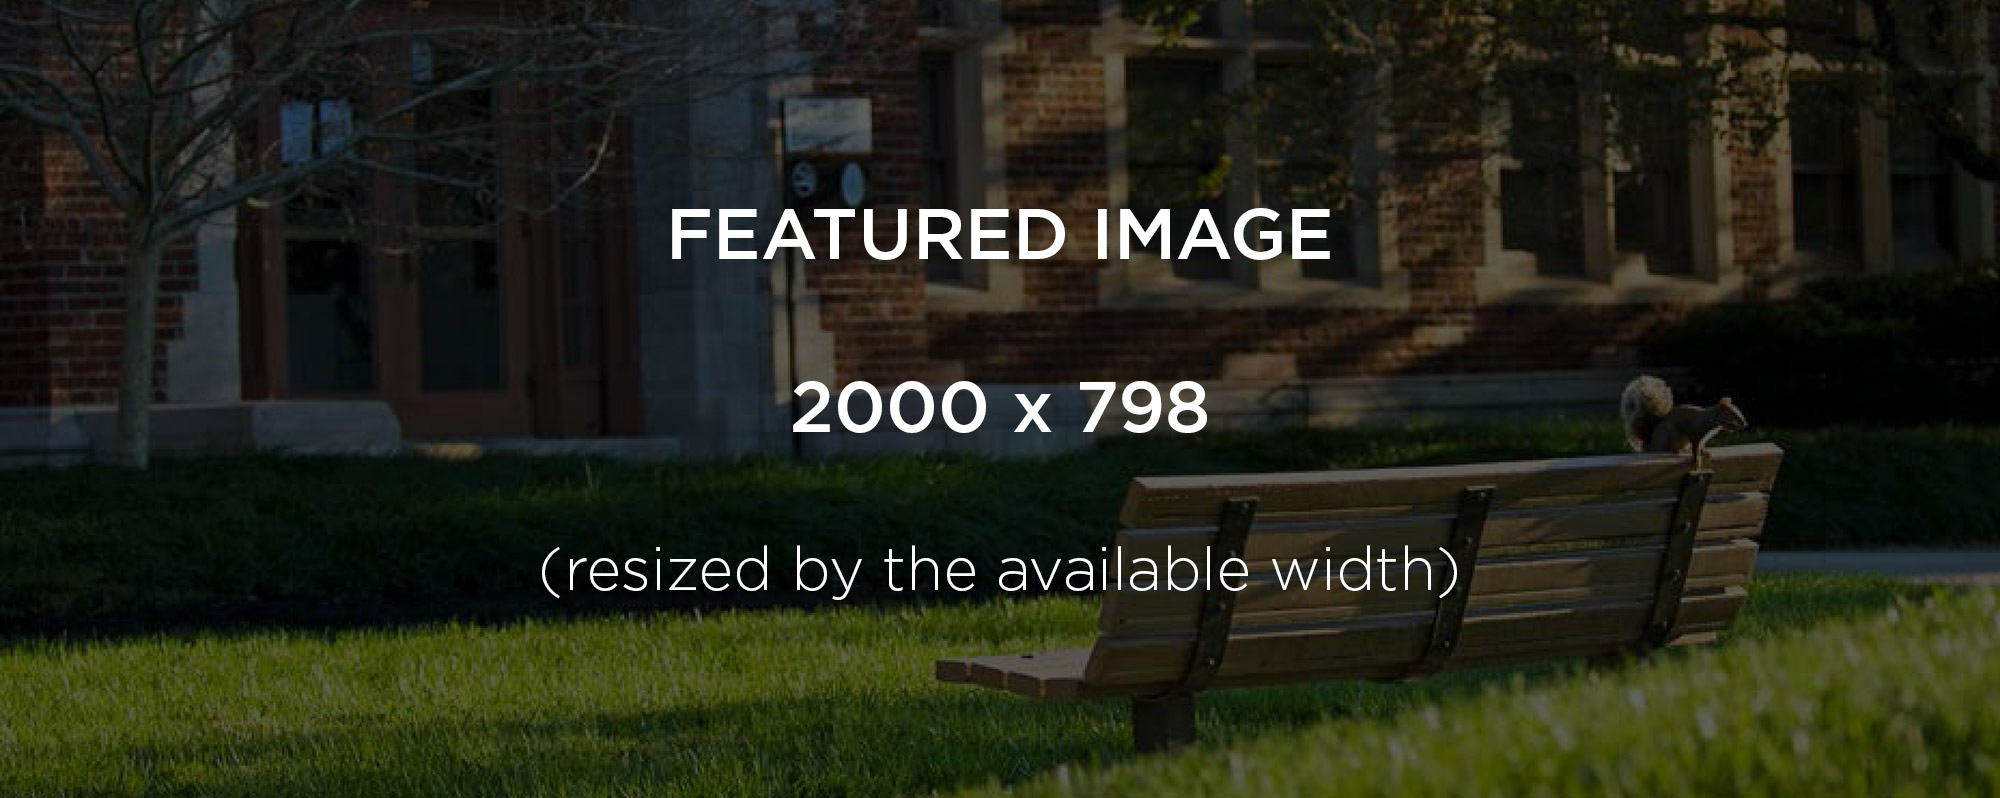 featured-image-template